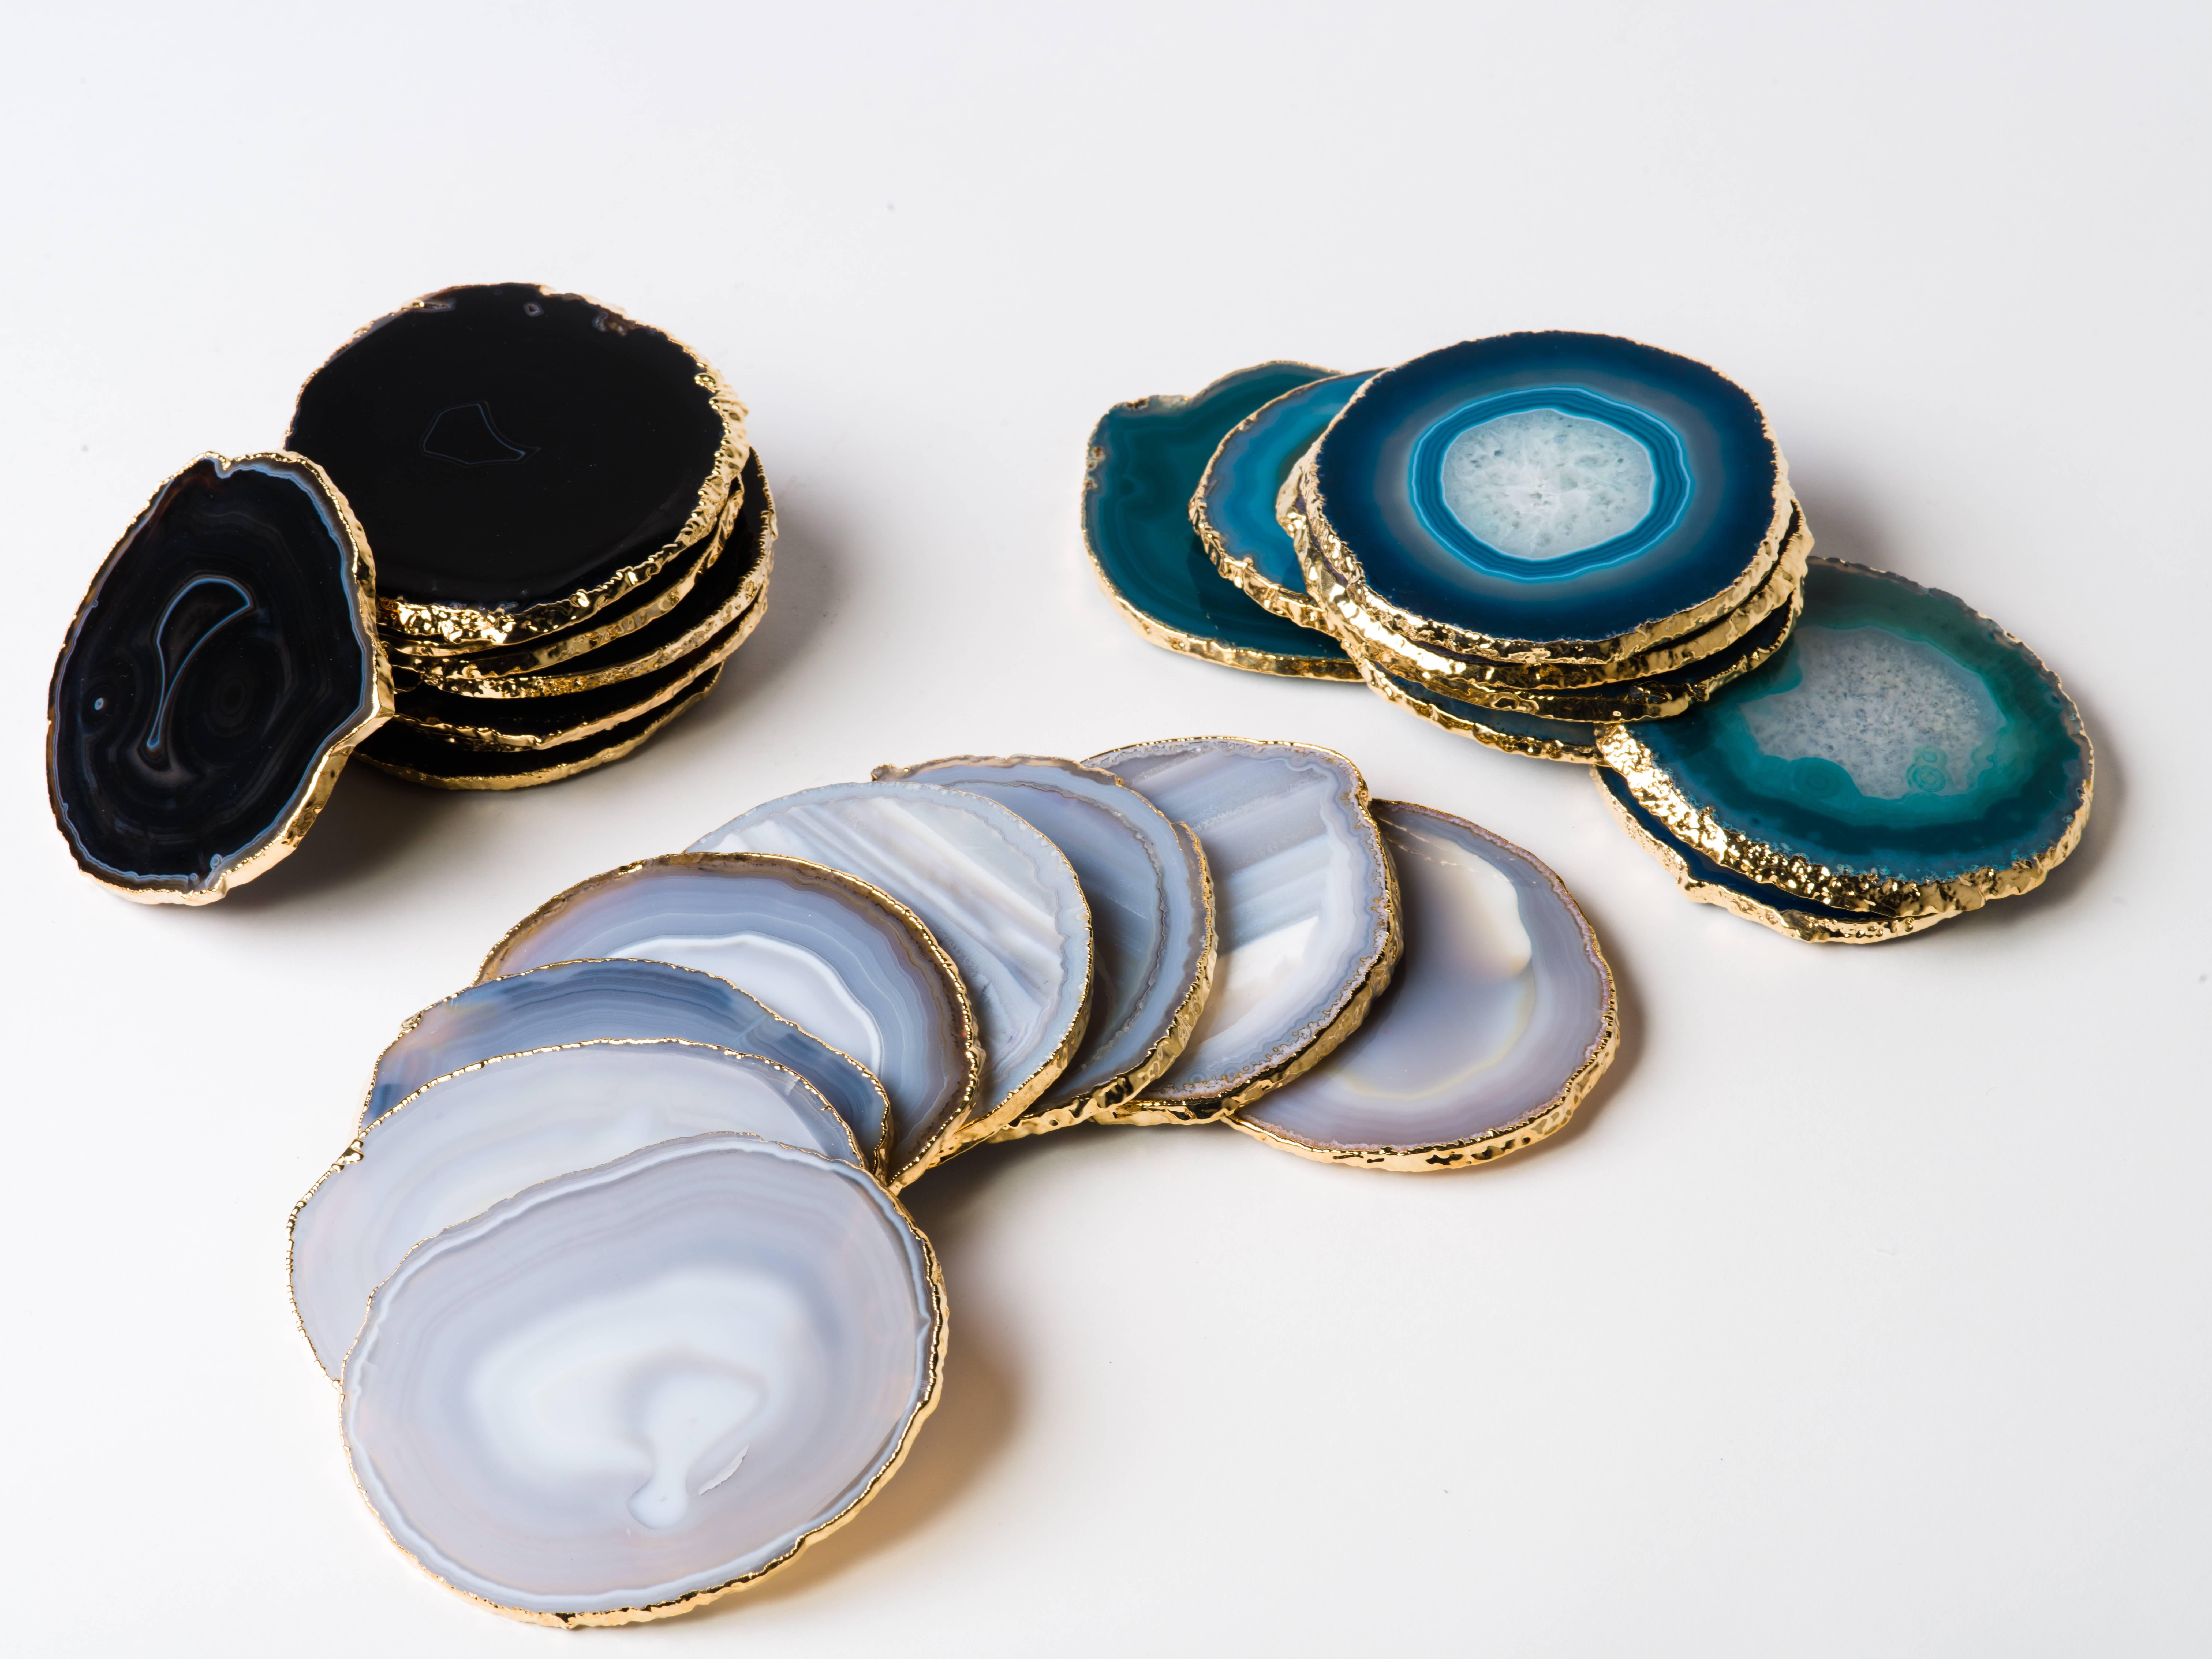 Set of Eight Semi-Precious Gemstone Coasters in Teal Wrapped in 24-Karat Gold 1